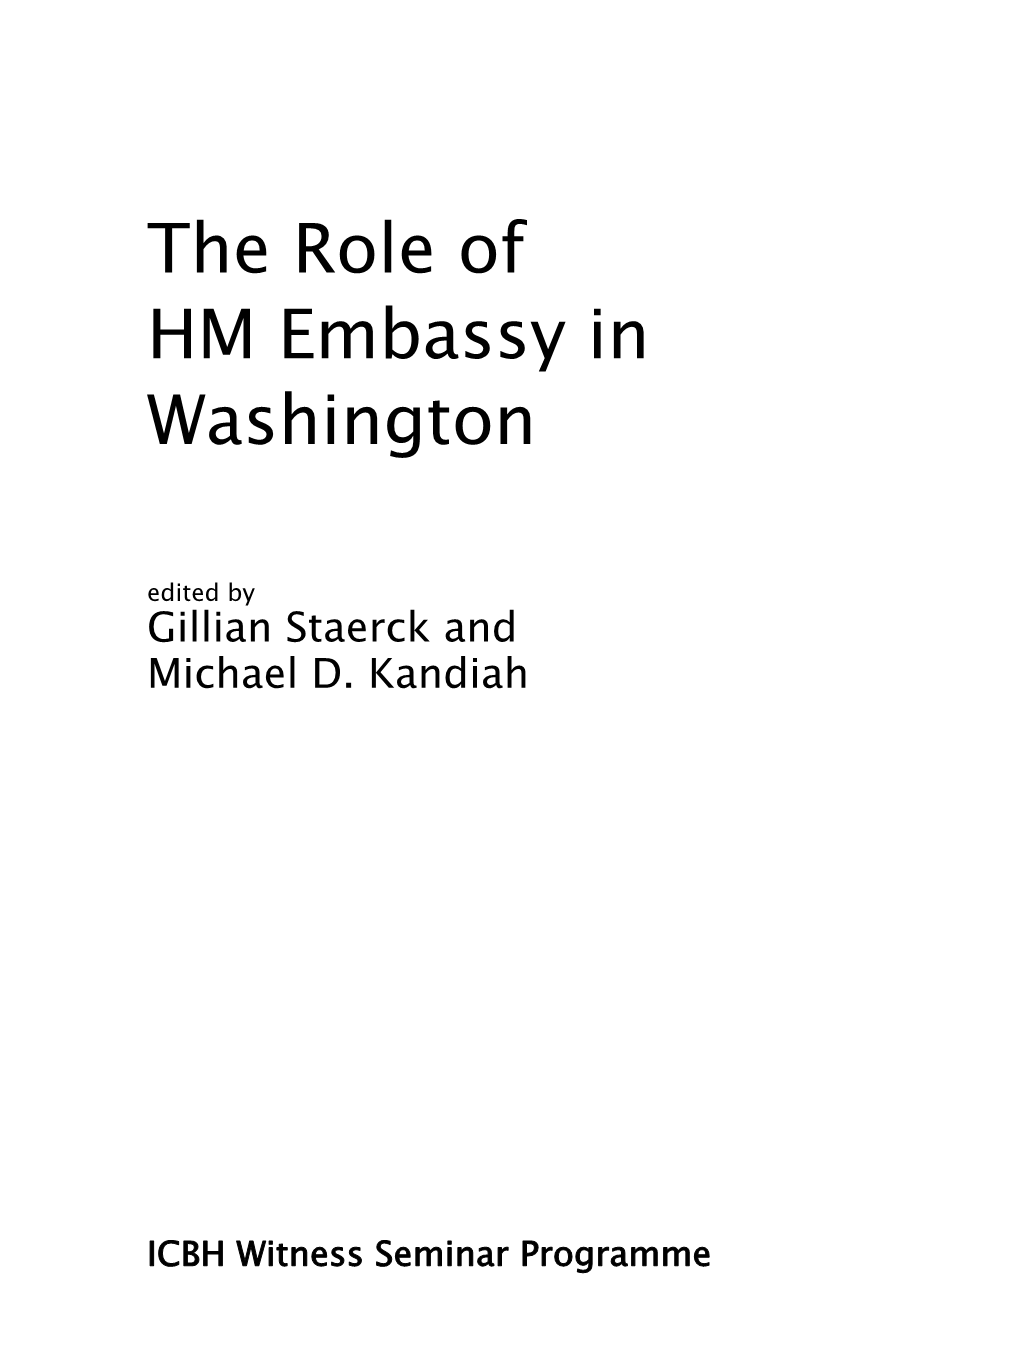 The Role of HM Embassy in Washington